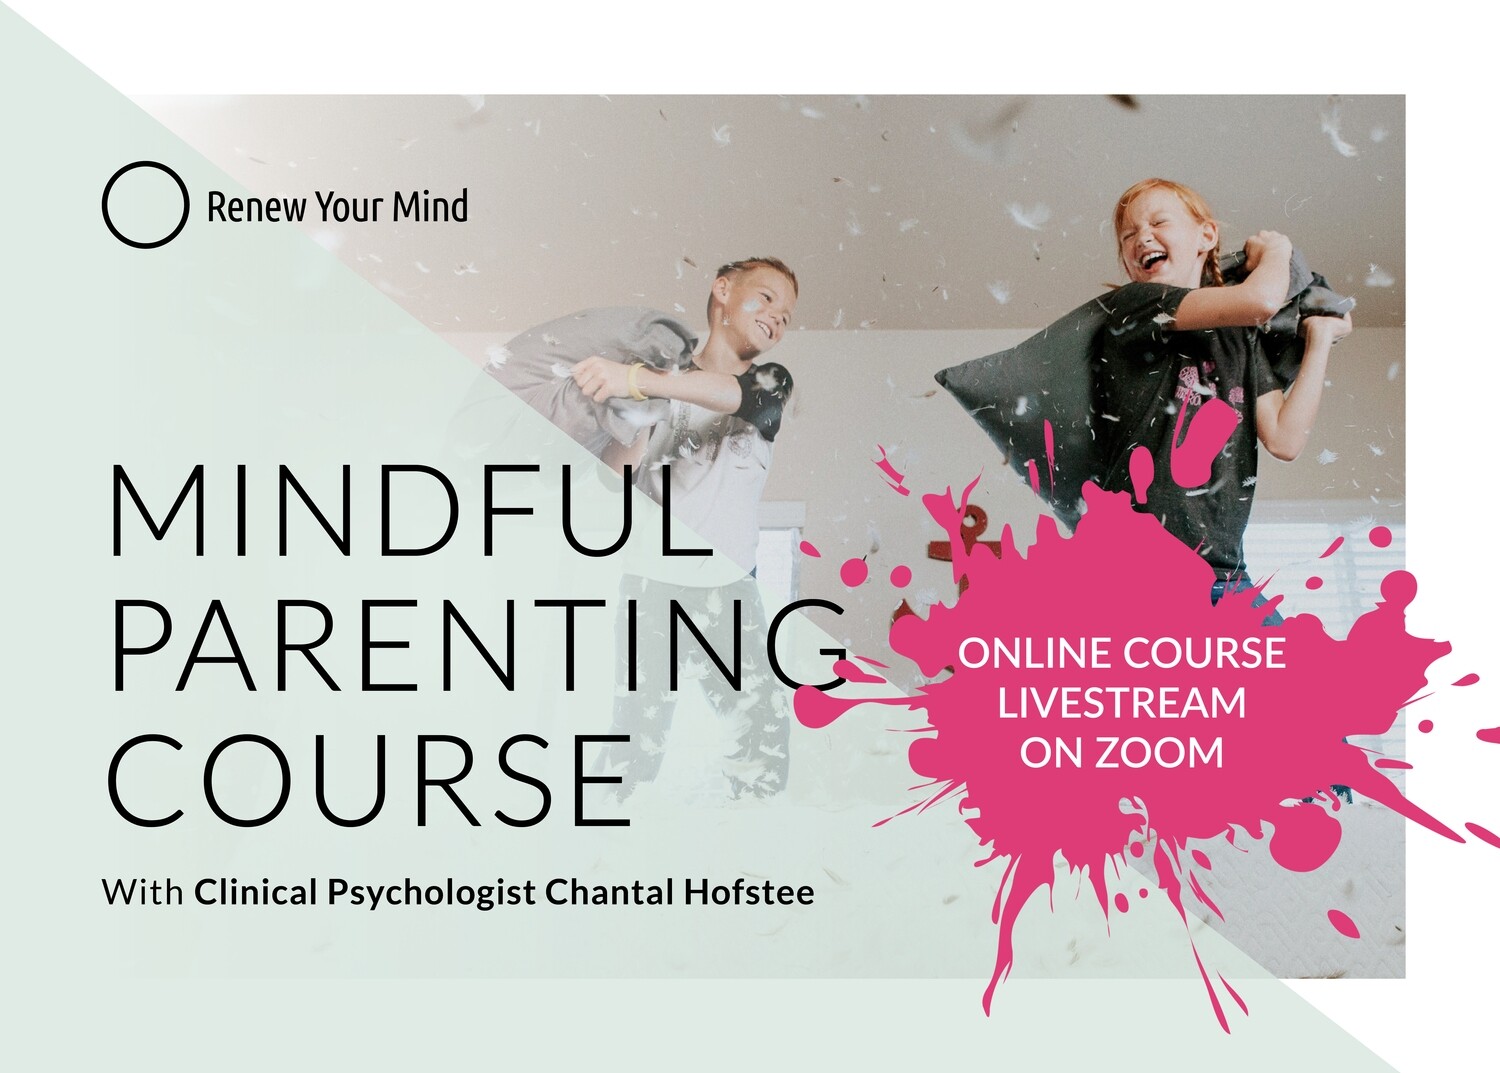 Online Mindful Parenting course: 6 session course, starting Tue 17 May '22